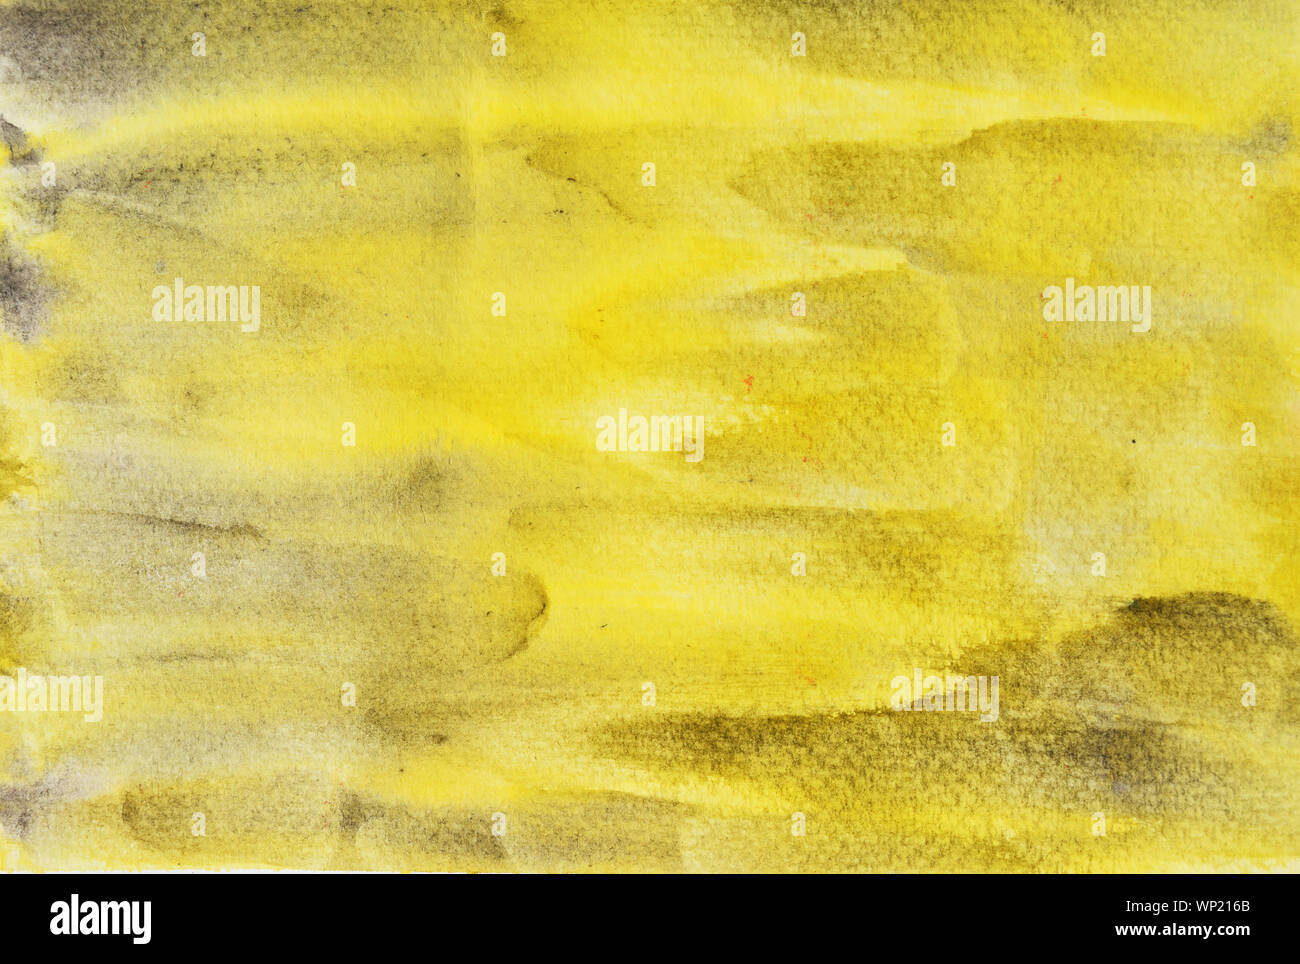 Black color stains flow on yellow surface , Illustration abstract watercolor hand draw on paper Stock Photo